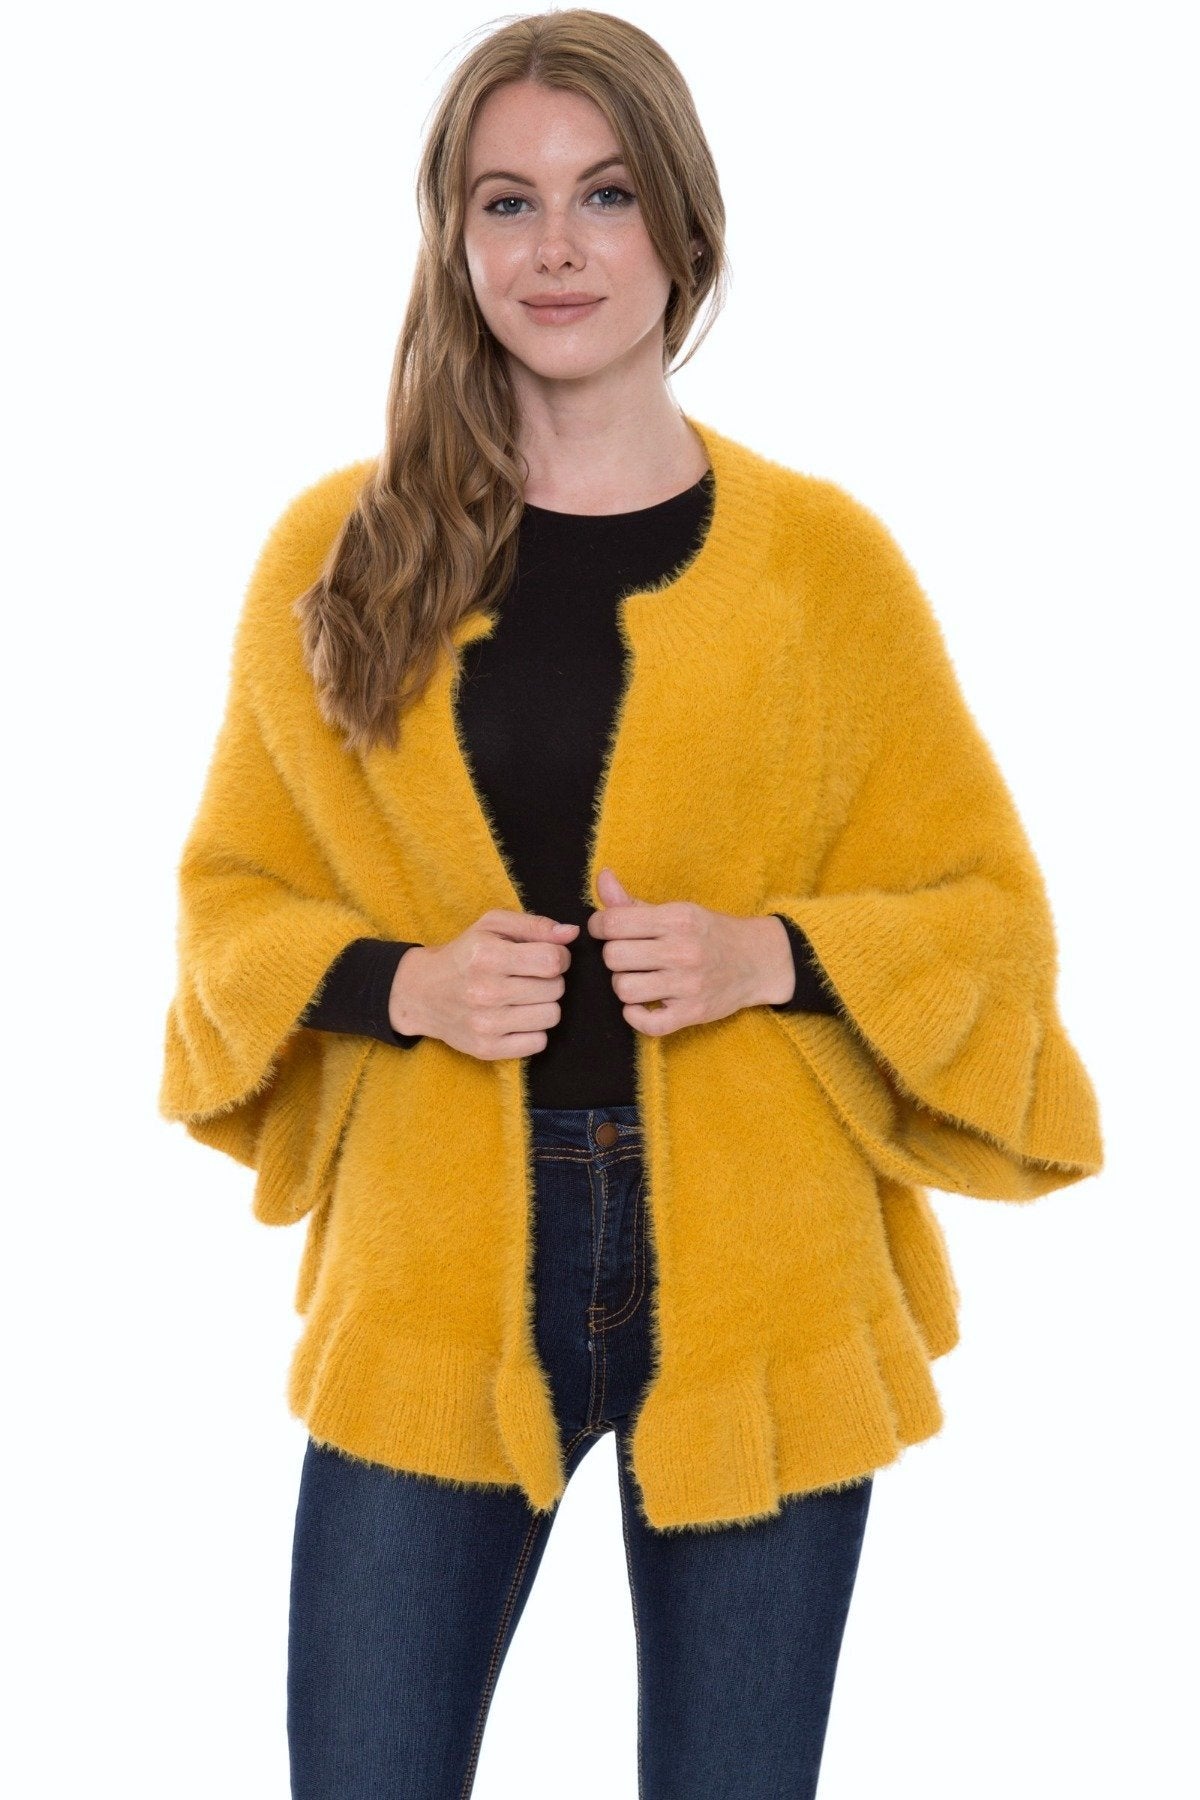 Solid Color Cardigan W/ Bell Sleeves & Scalloped Edges 